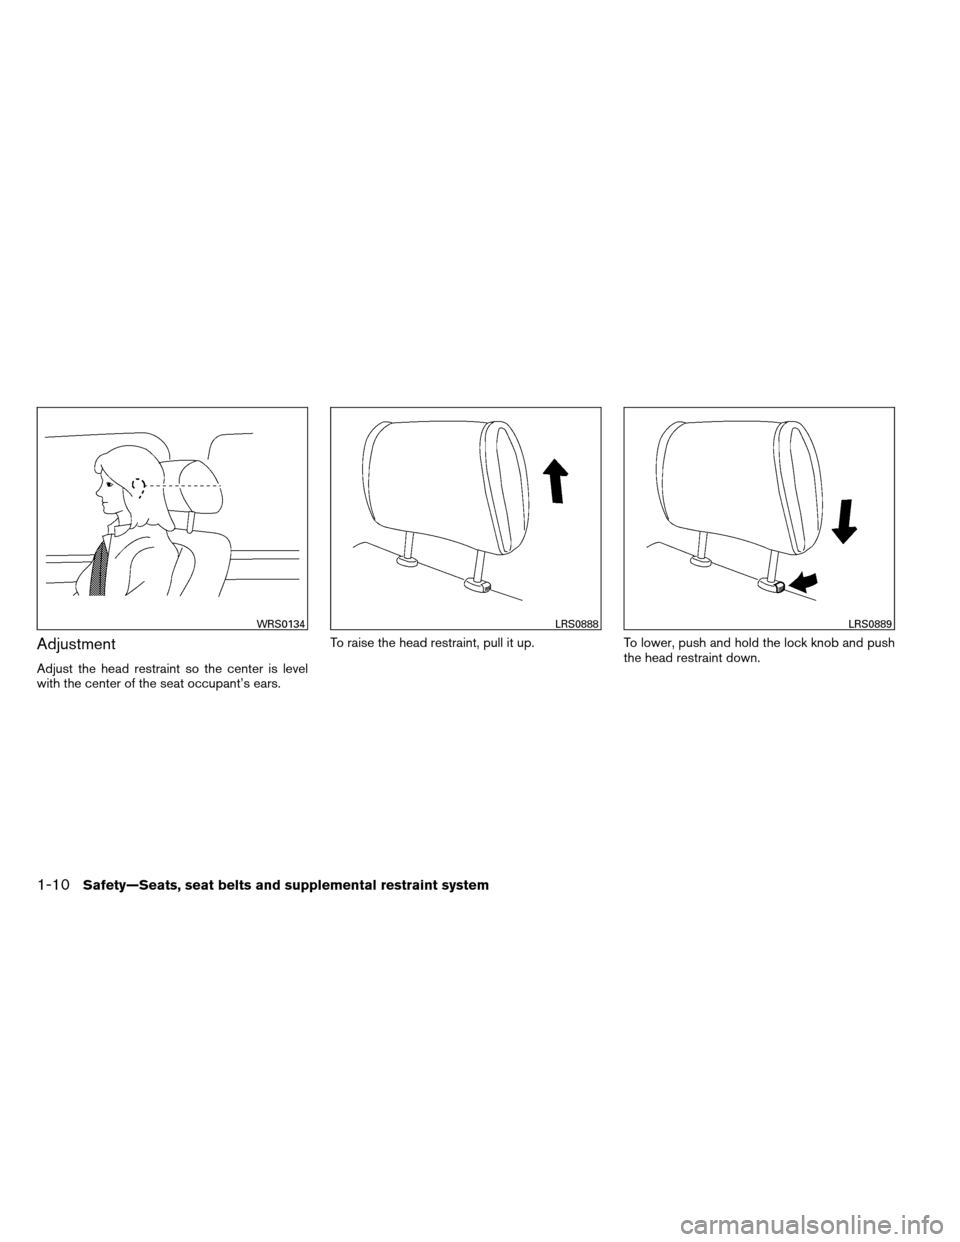 NISSAN ARMADA 2012 1.G Owners Manual Adjustment
Adjust the head restraint so the center is level
with the center of the seat occupant’s ears.To raise the head restraint, pull it up.
To lower, push and hold the lock knob and push
the he